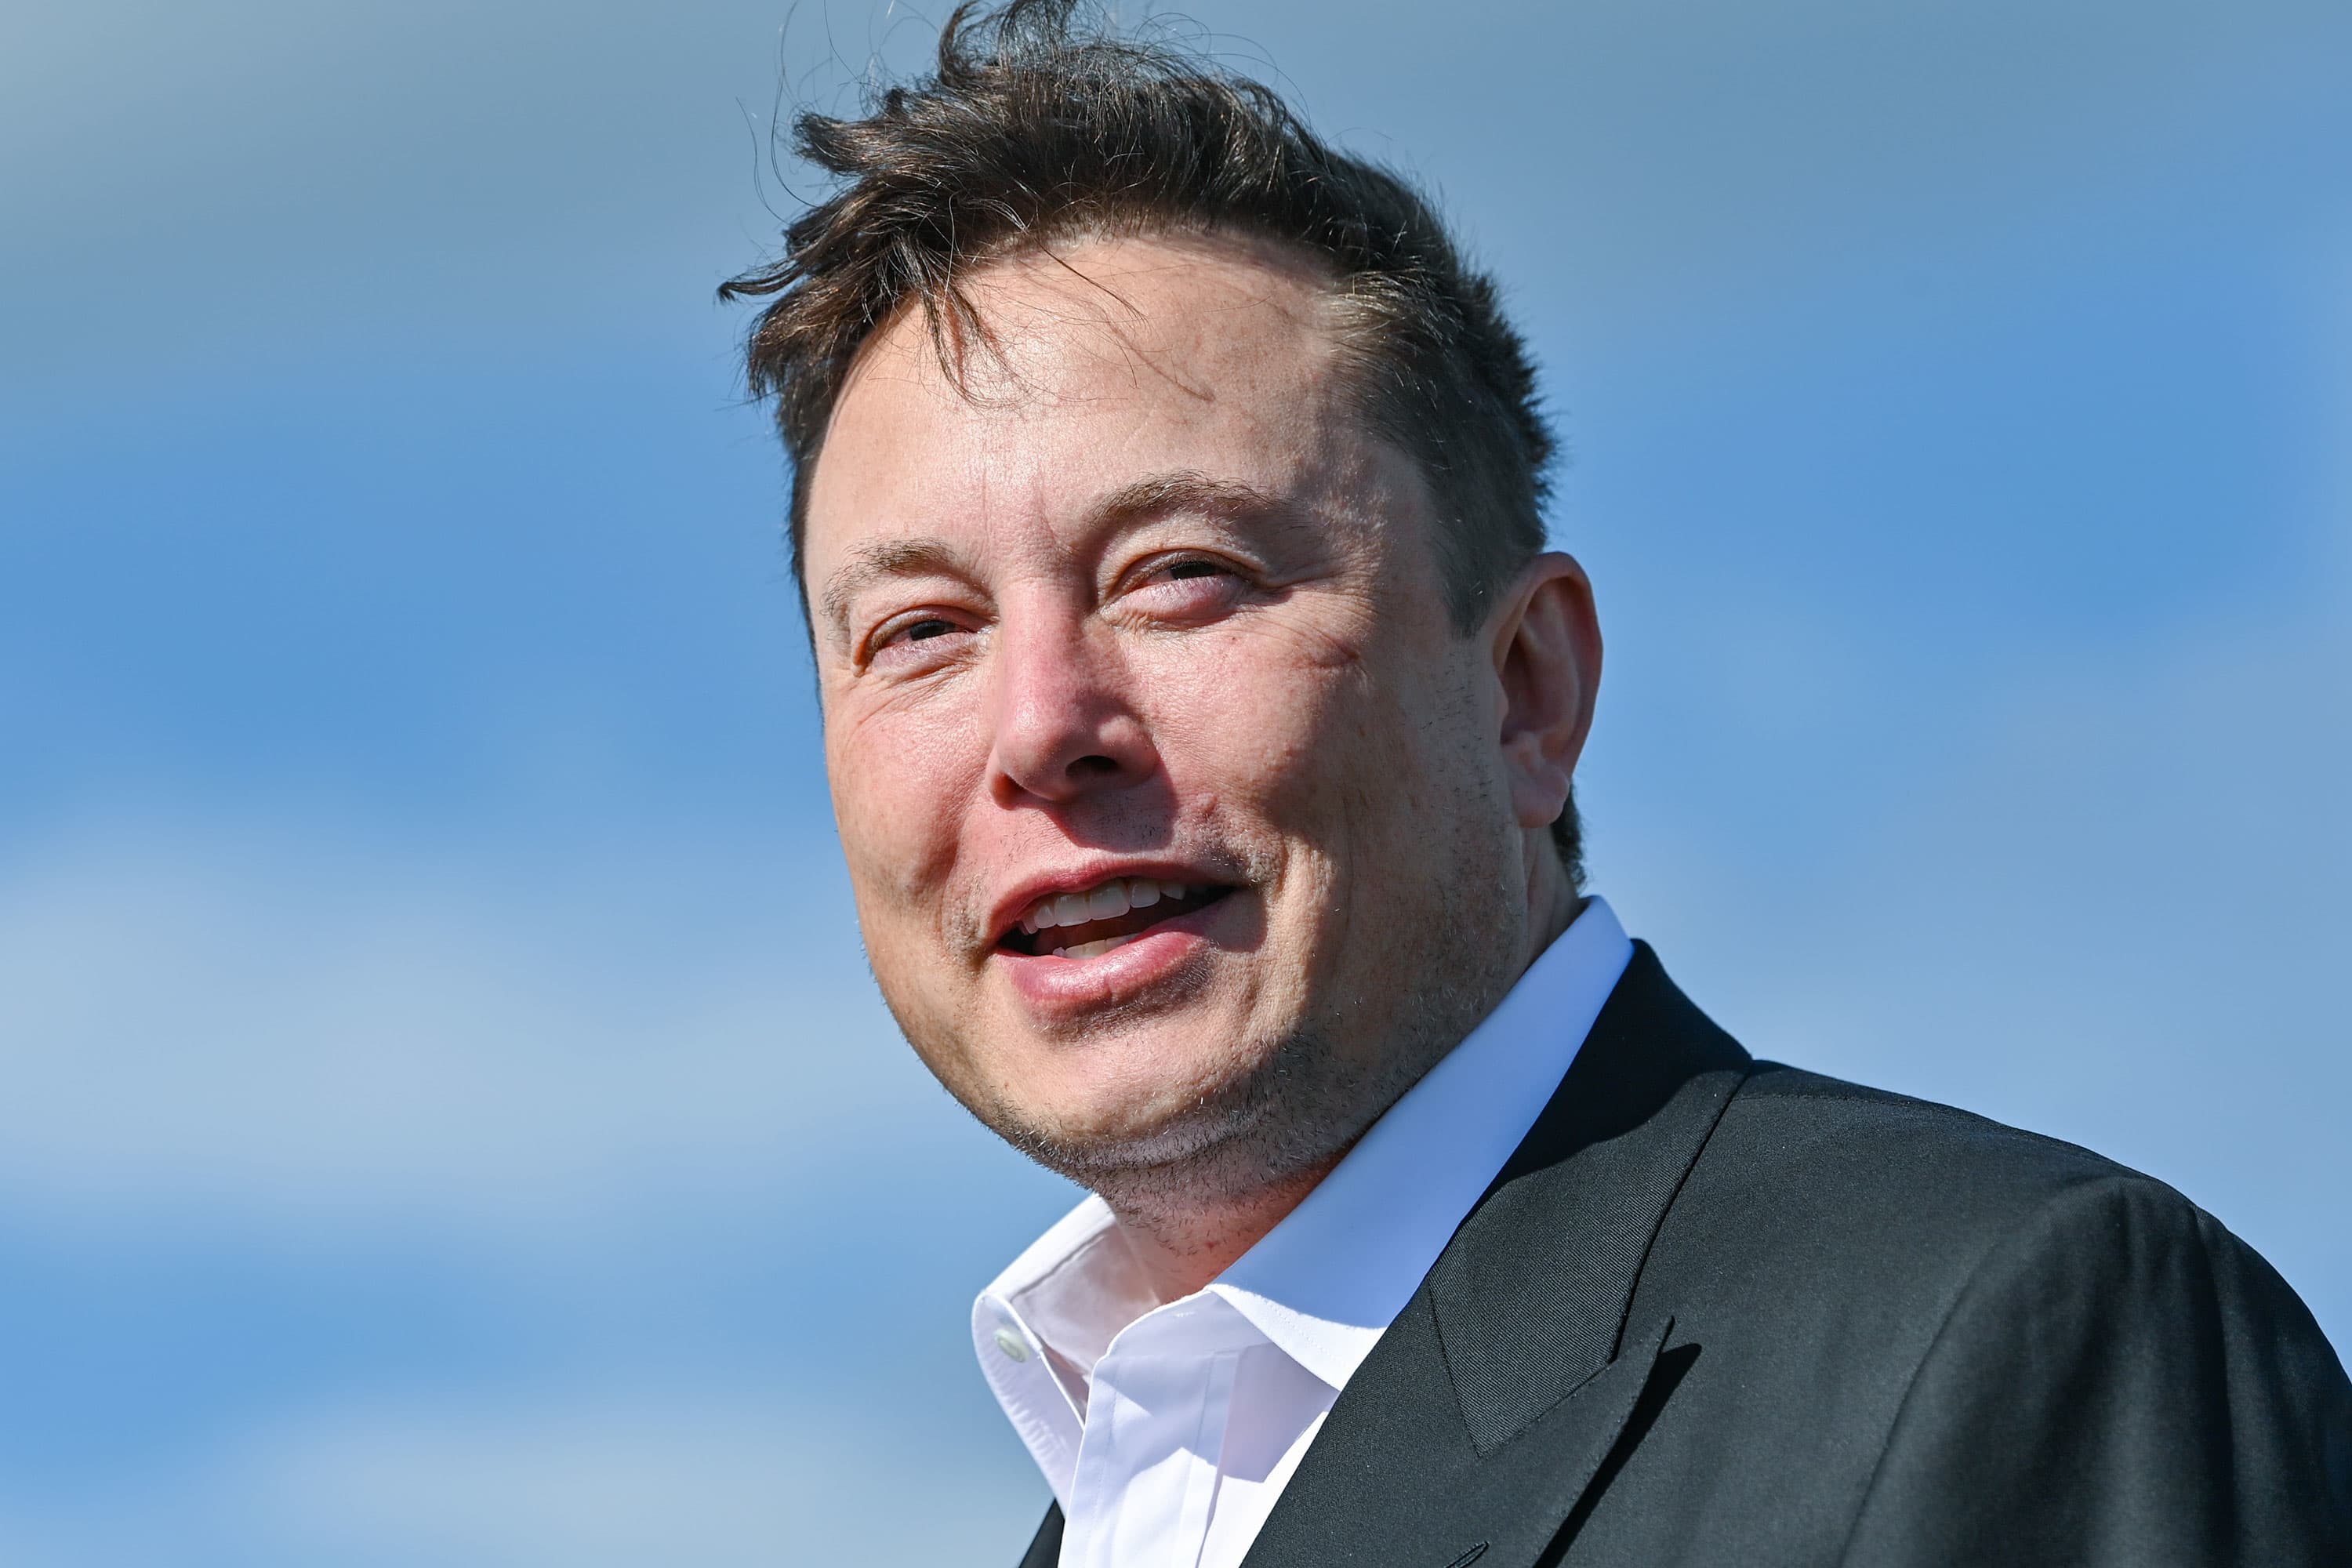 Elon Musk Is Now The Richest Person In The World Passing Jeff Bezos